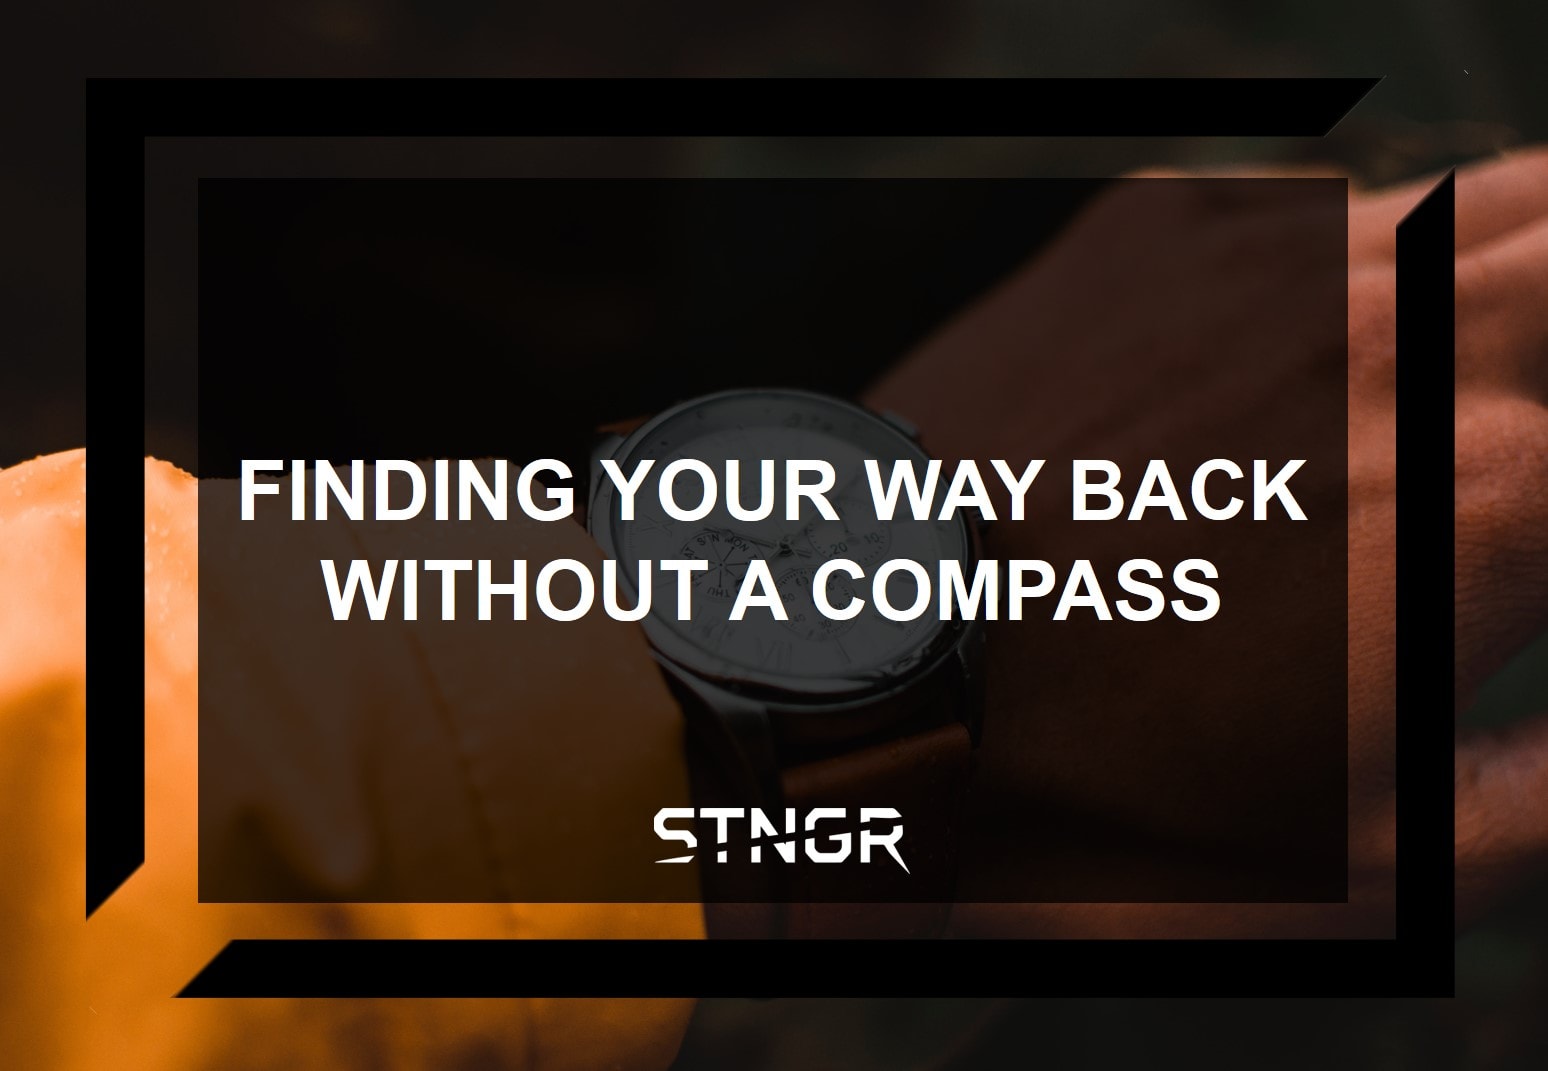 Finding Your Way Back Without a Compass